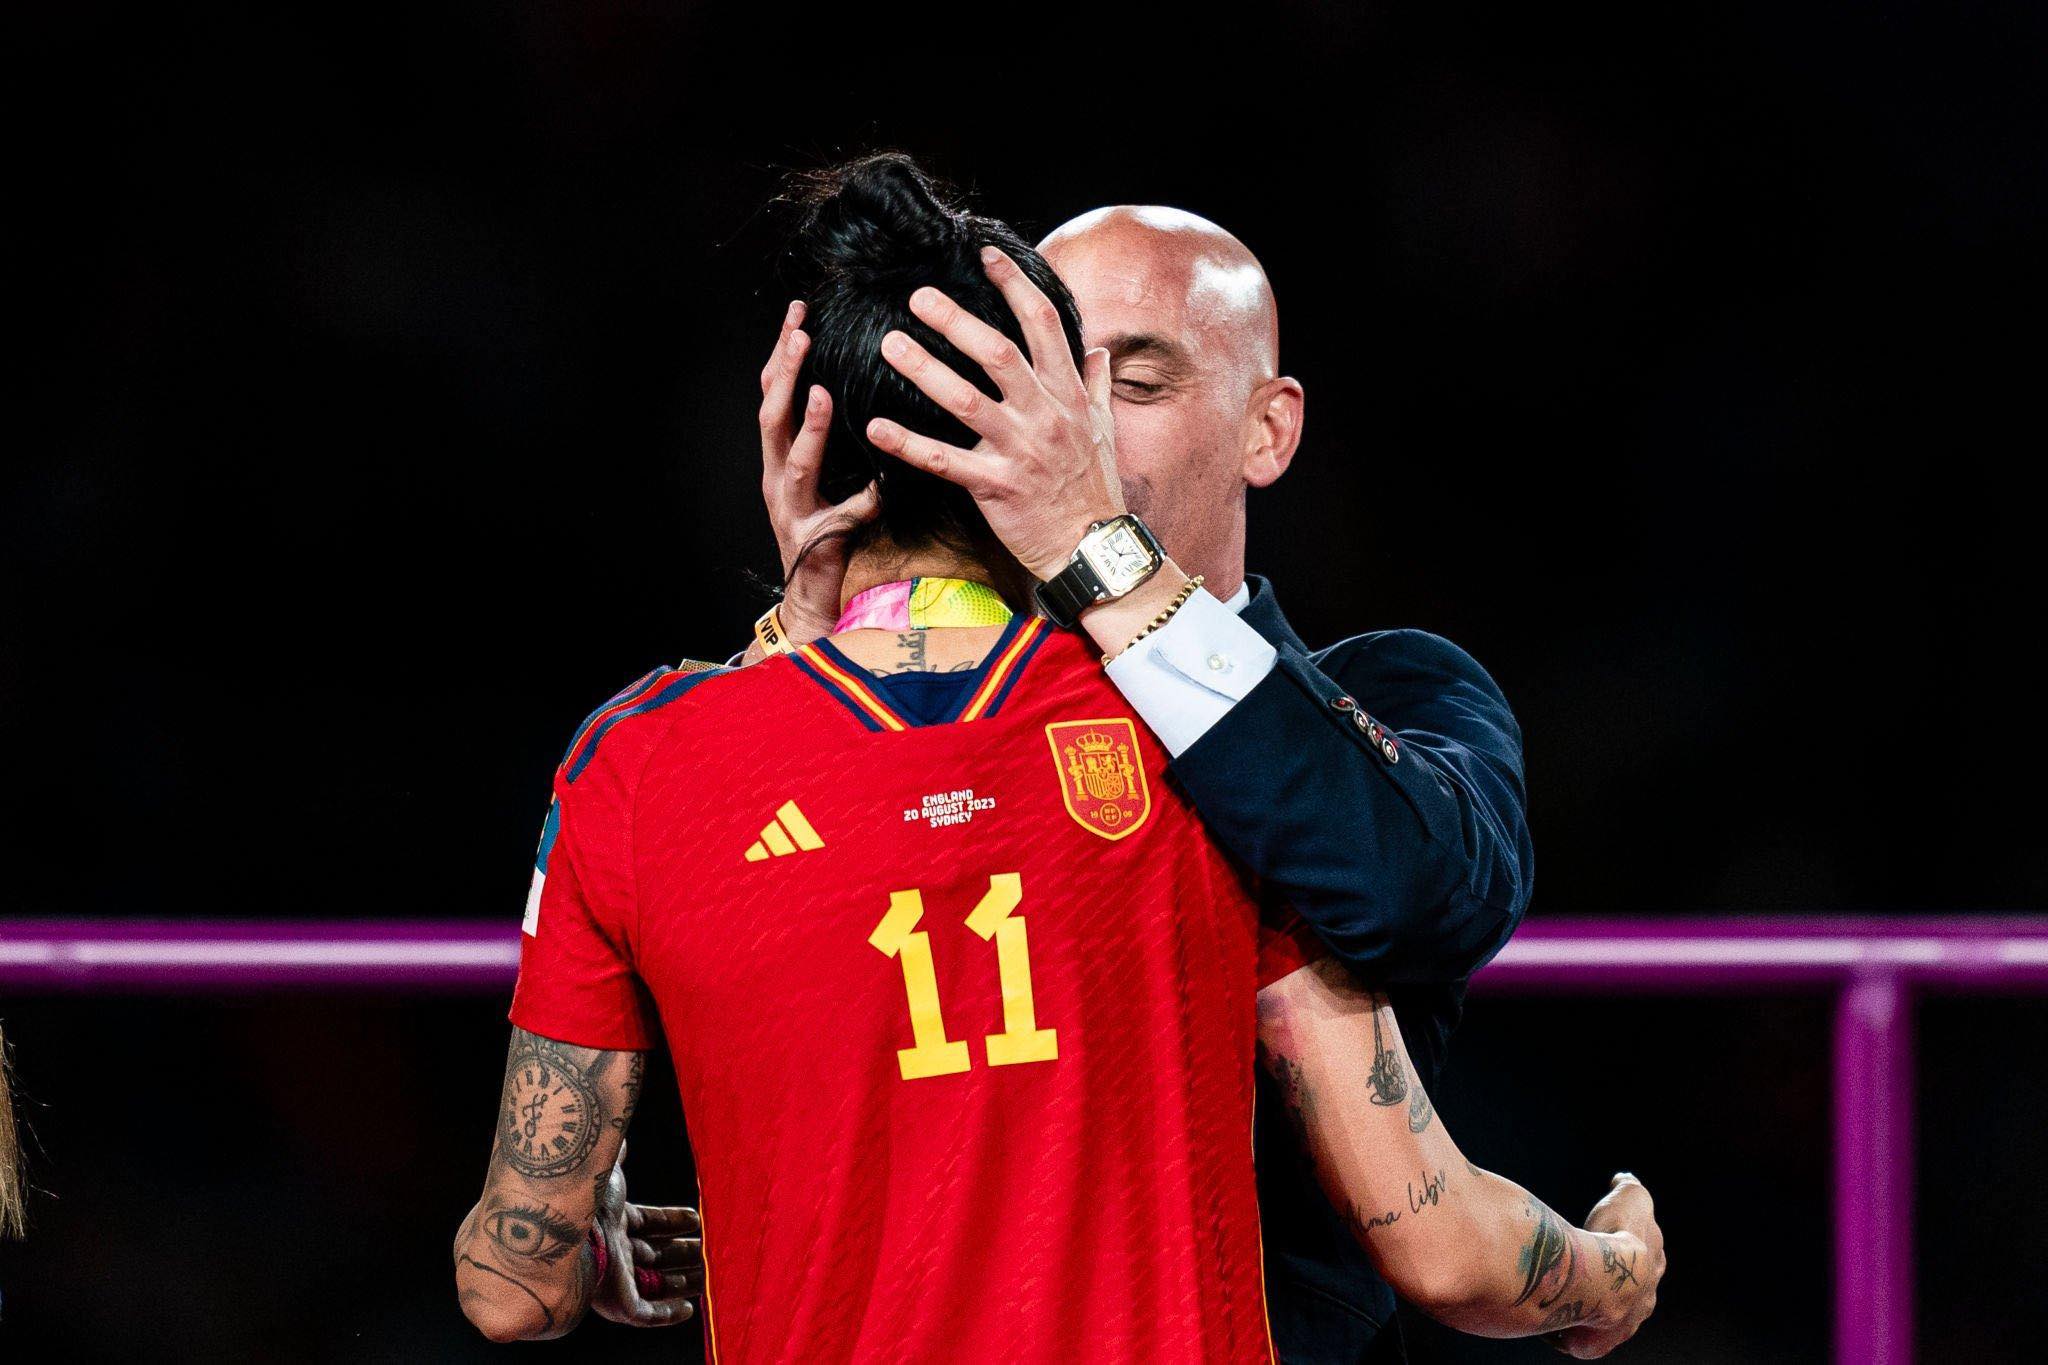 UN: Spanish football kiss scandal a ‘turning point’ against sexism in sports